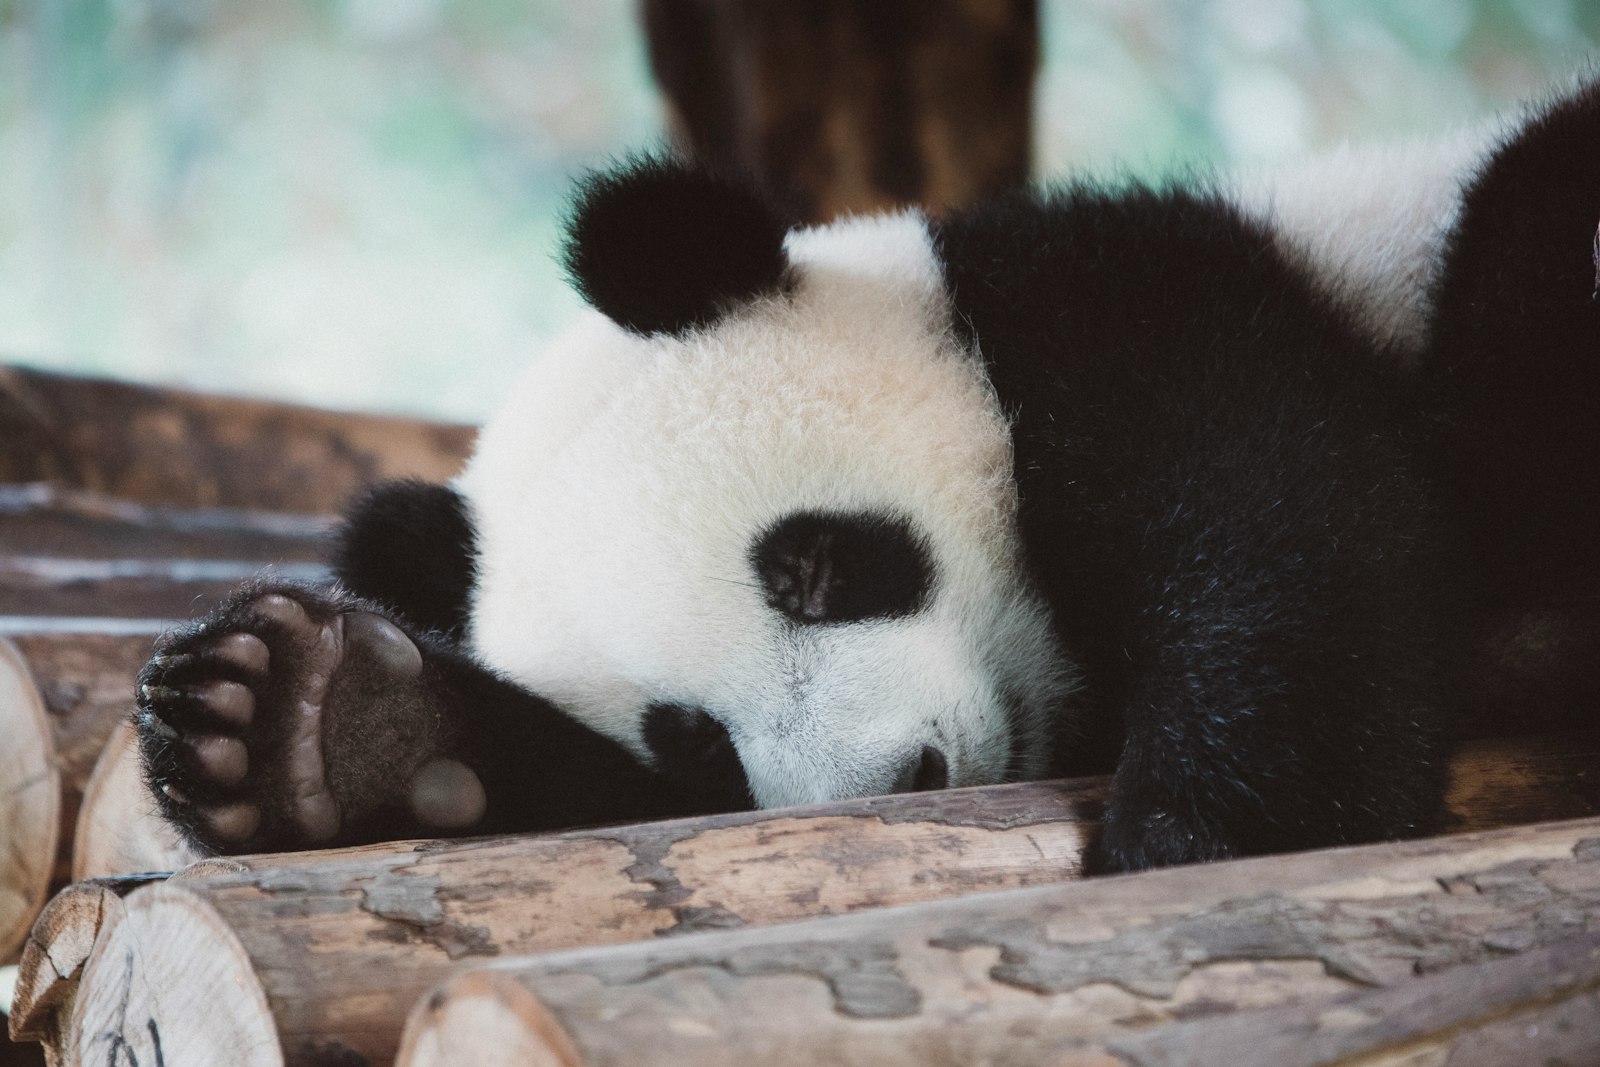 What you need to know before visiting Panda Research Breeding Center?